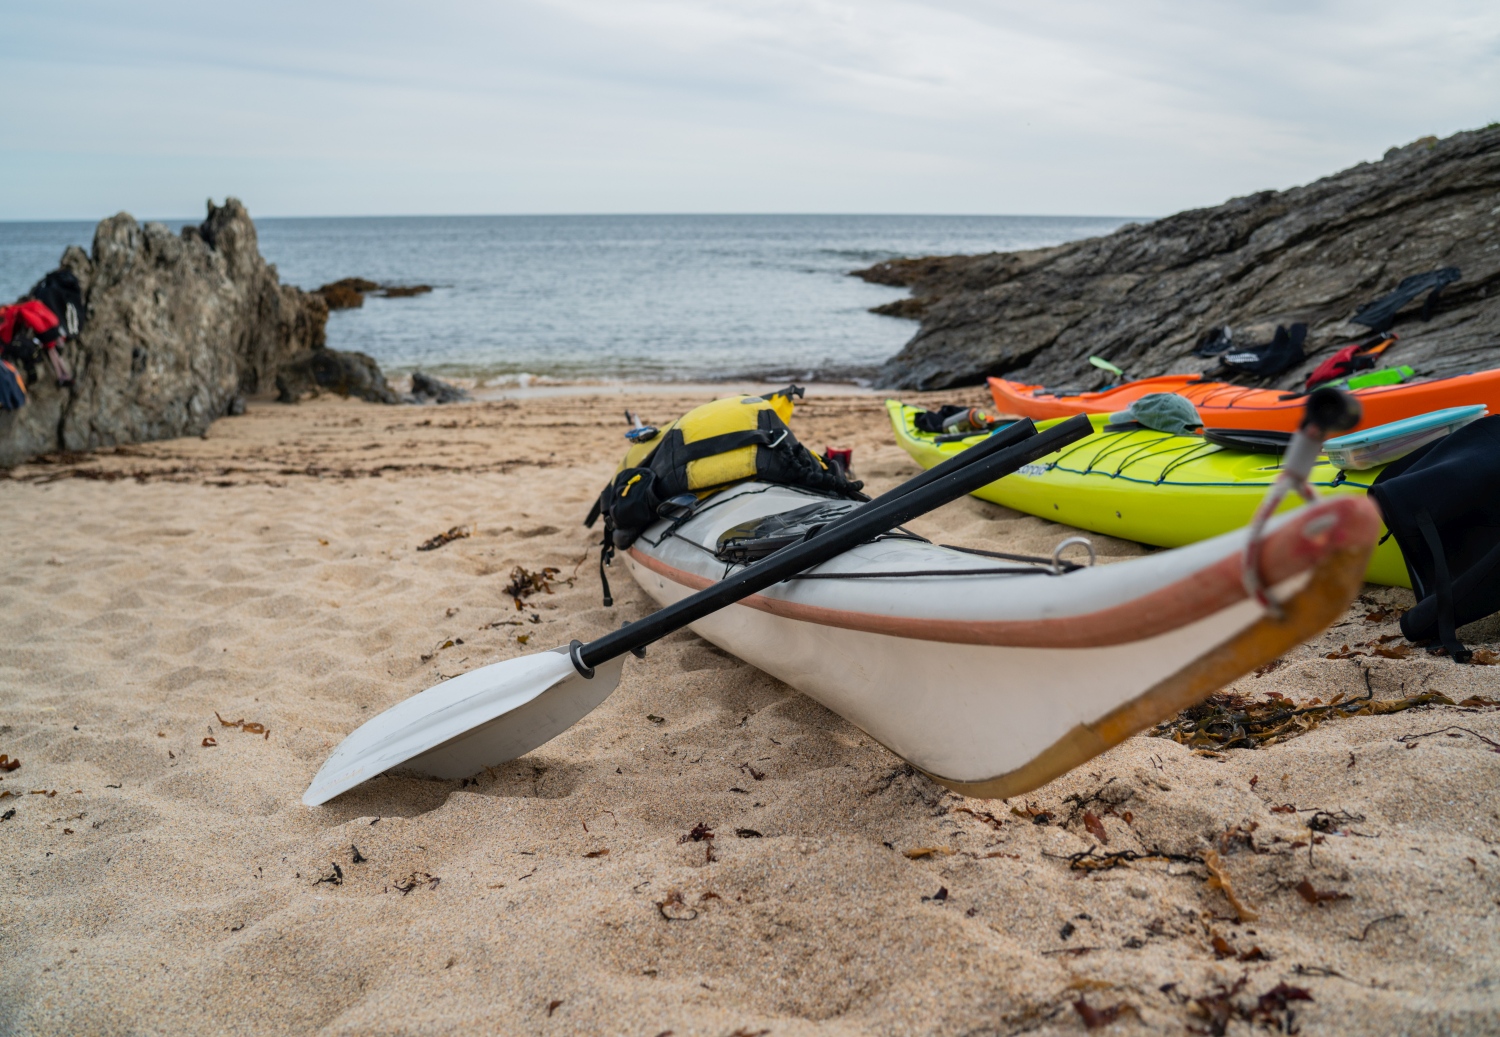 Kayaks parked up on sand next to sea in cove - Brittany, France